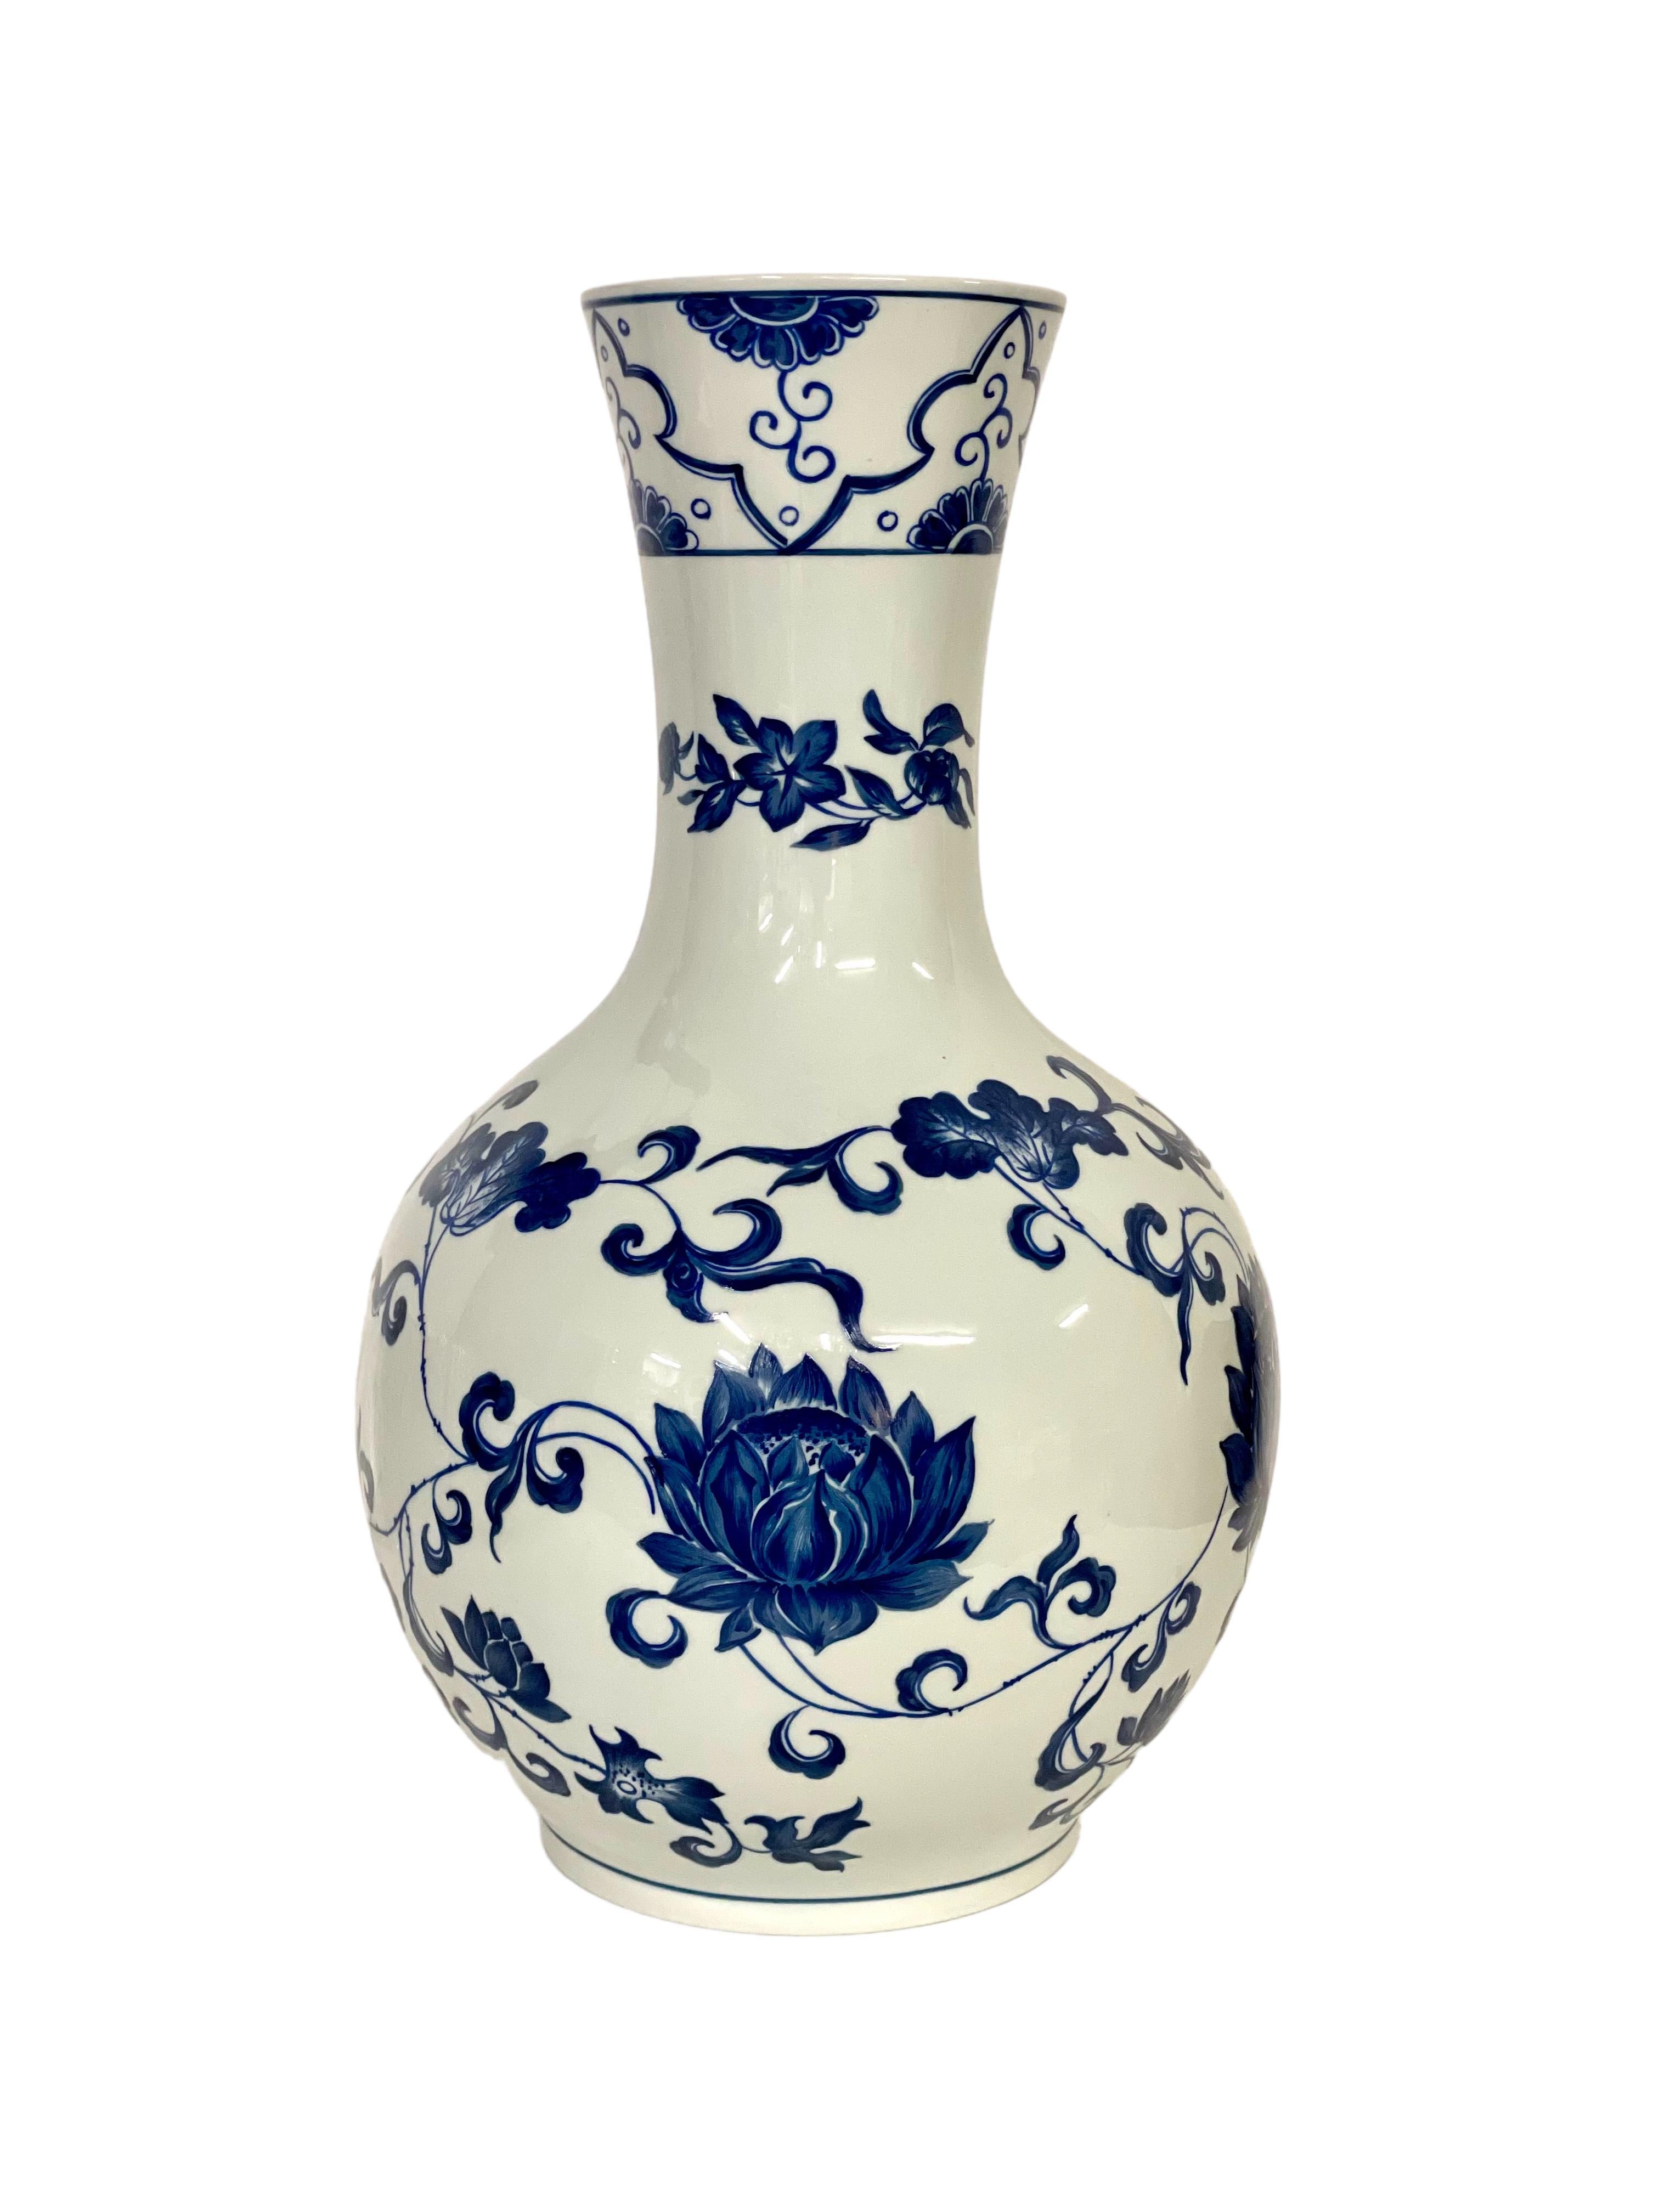 This wonderfully statuesque late 19th century Paris Porcelain vase, beautifully decorated with a hand-painted design of blowsy blue flowers set against a white background, is fully glazed inside and out. Simple but elegant, this is a tall vase with